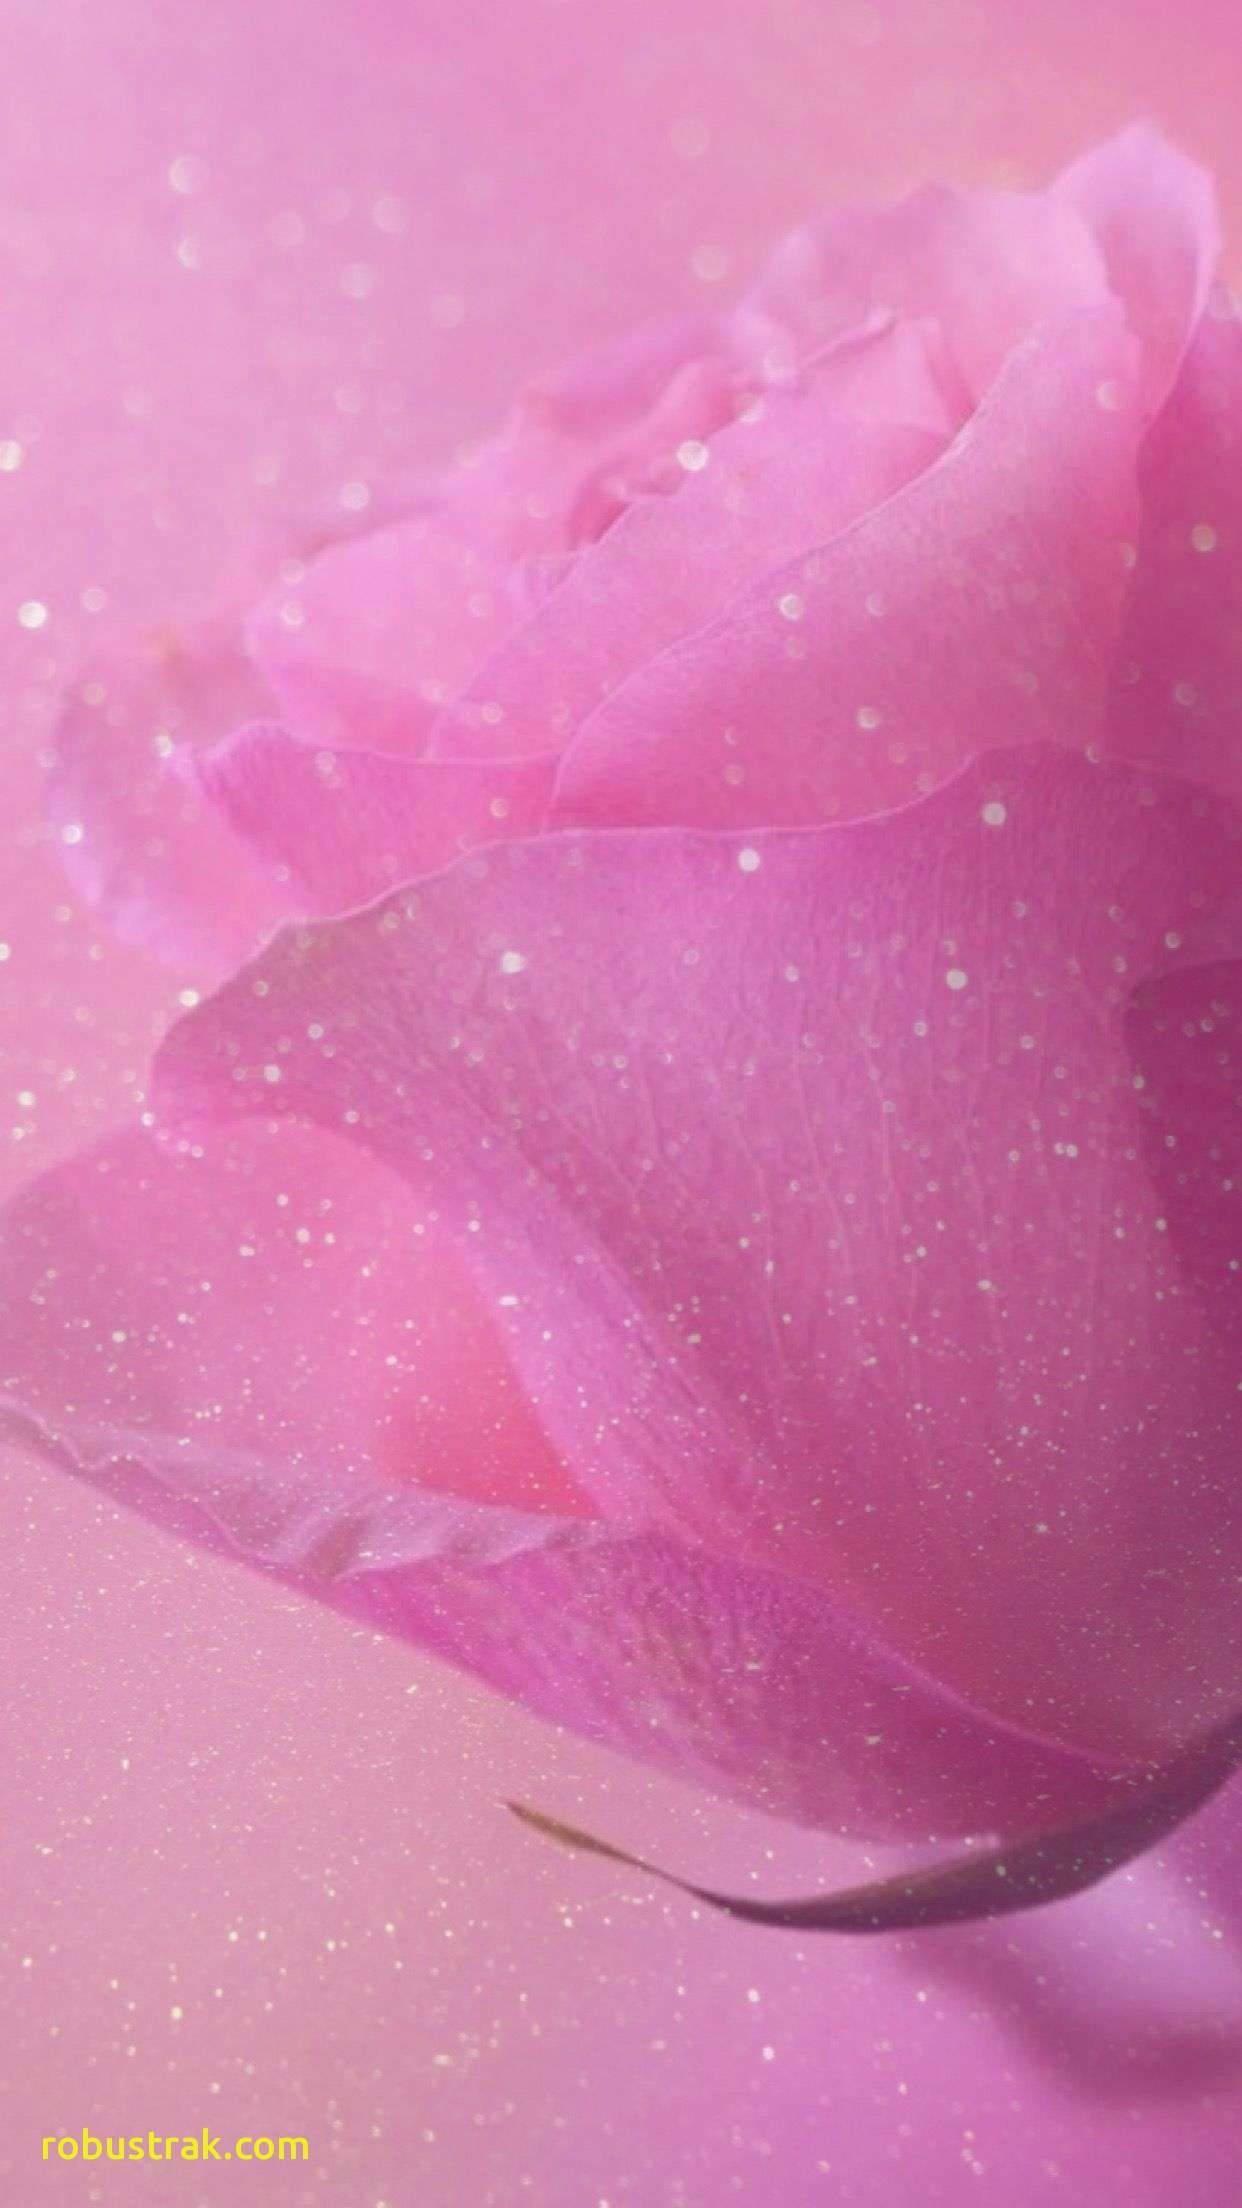 1242x2208 Hot Pink and orange Wallpaper Luxury Rose Sparkle Glitter Wallpaper  Background Pink Pretty Girly